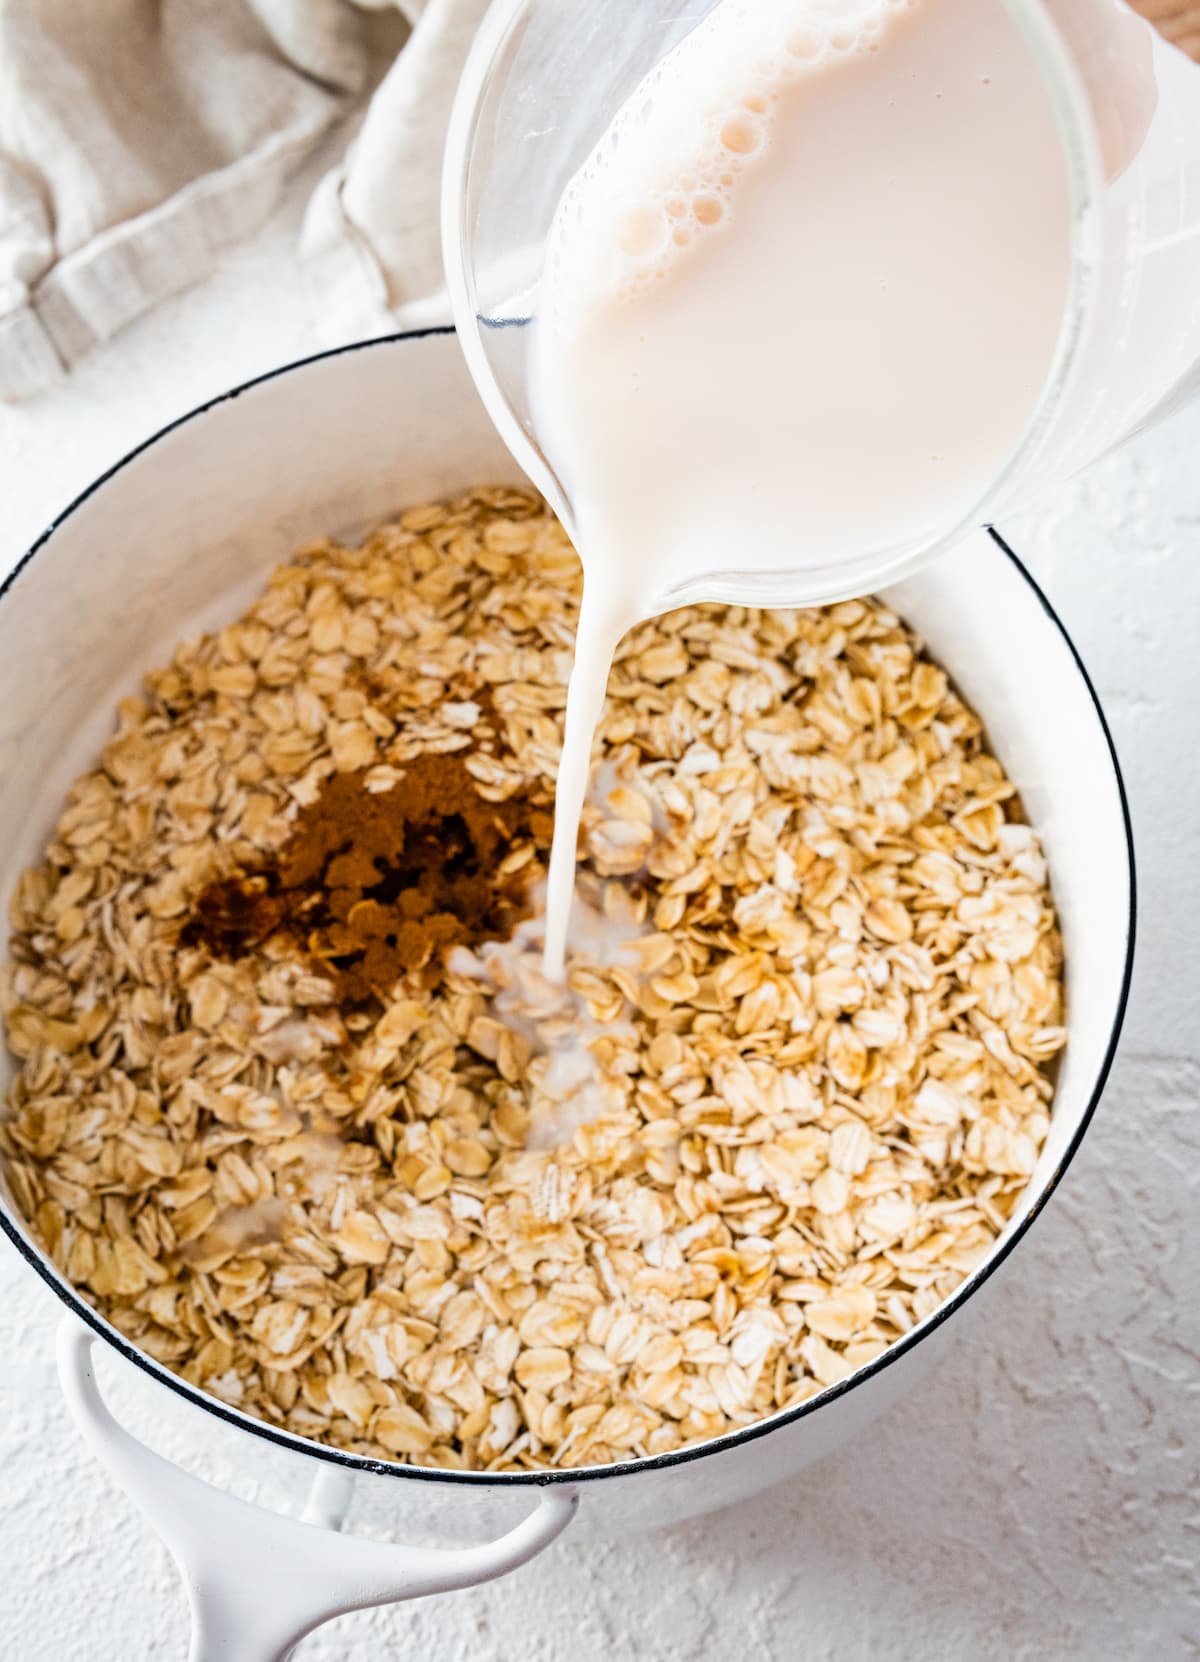 Milk being poured into a pot with rolled oats.